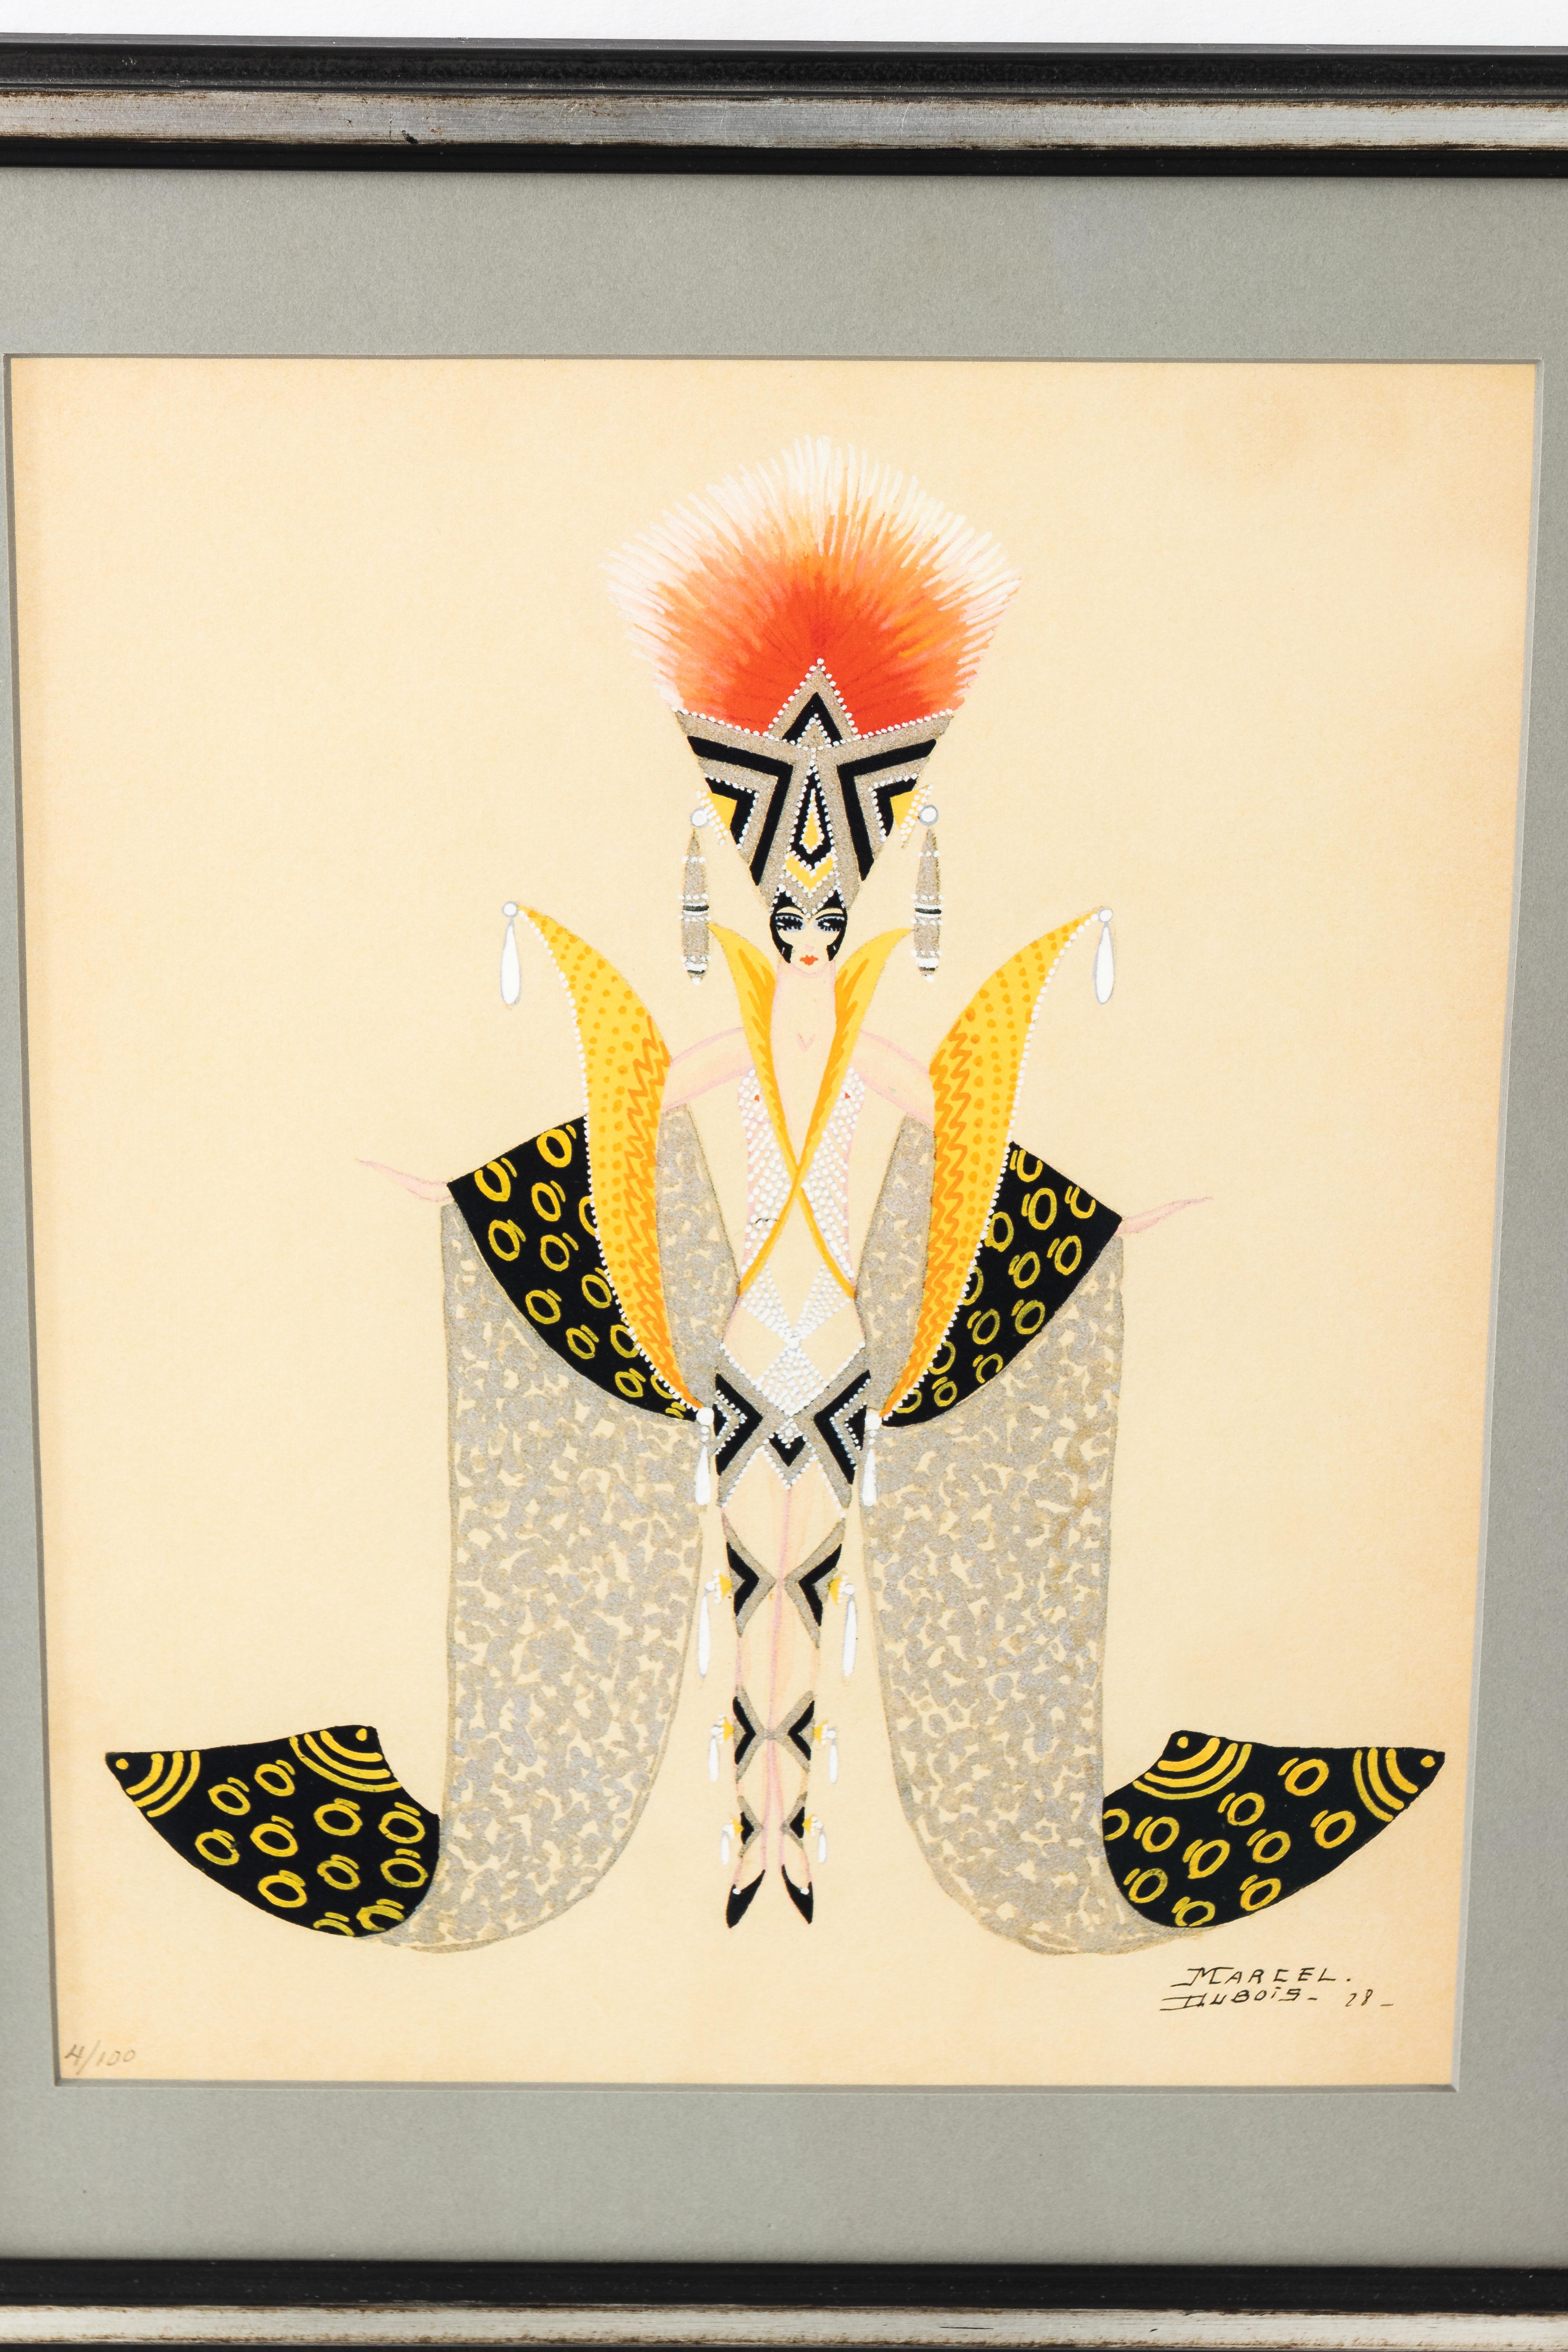 Newly framed follies bergere costume illustration by Marcel DuBois. Costume N5, no. 1028 chorus girl in black, white and orange costume. Number 4/100. Iris print, 2001. Print is 10